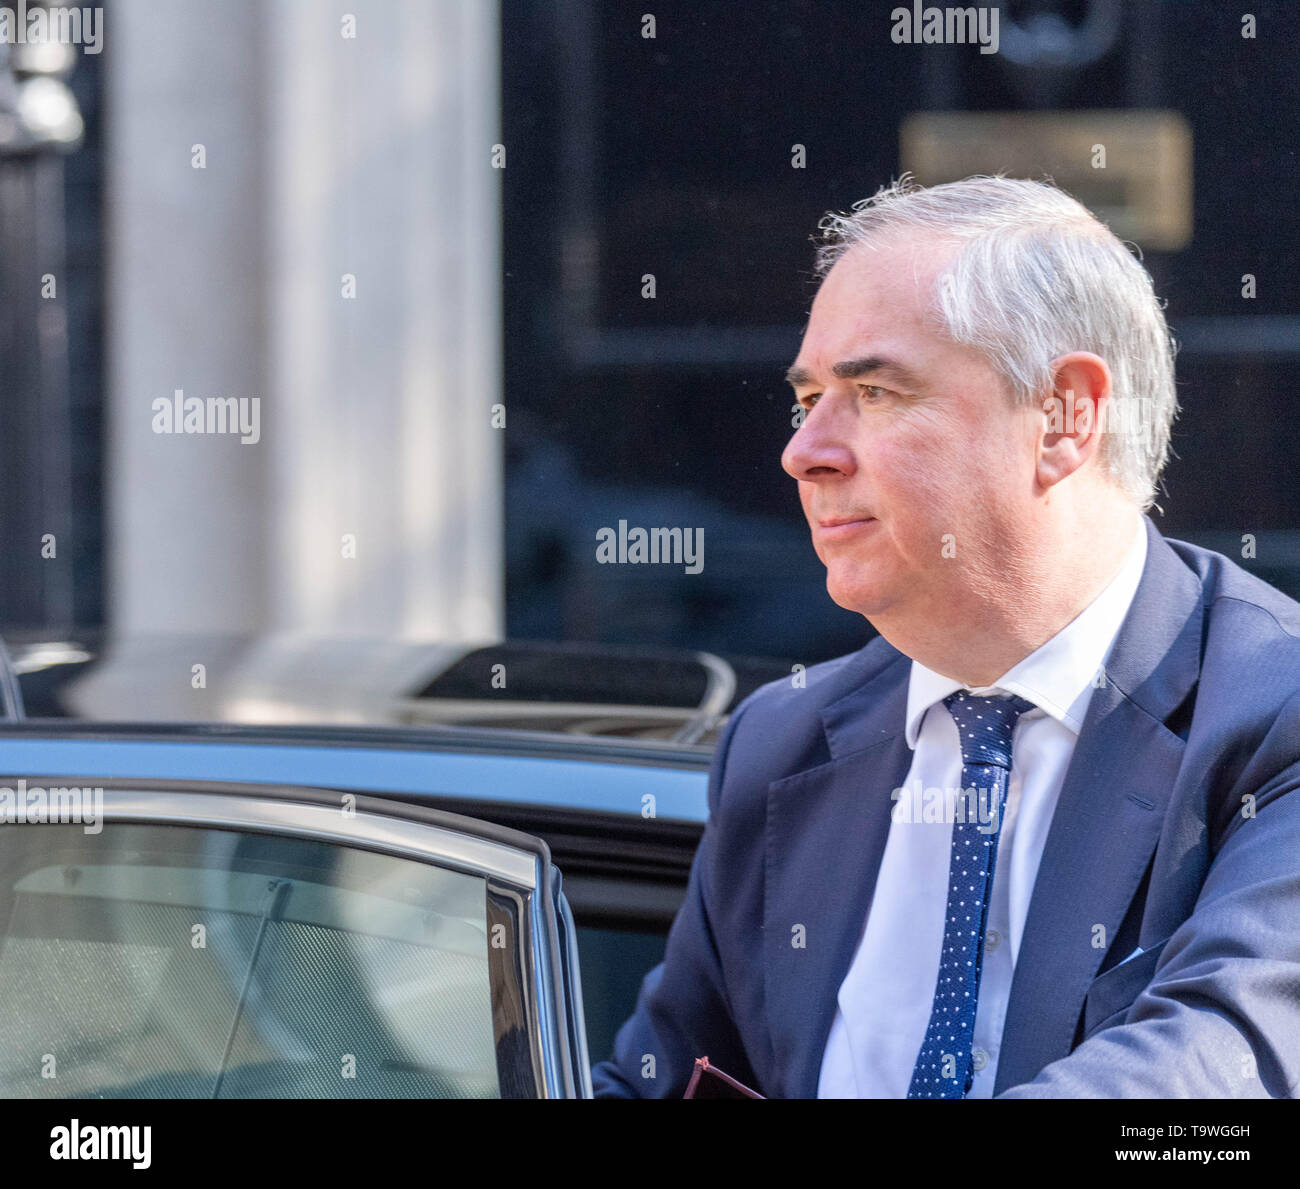 London, UK. 21st May 2019, Geoffrey Cox QC MP arrives at a Cabinet meeting at 10 Downing Street, London Credit: Ian Davidson/Alamy Live News Stock Photo